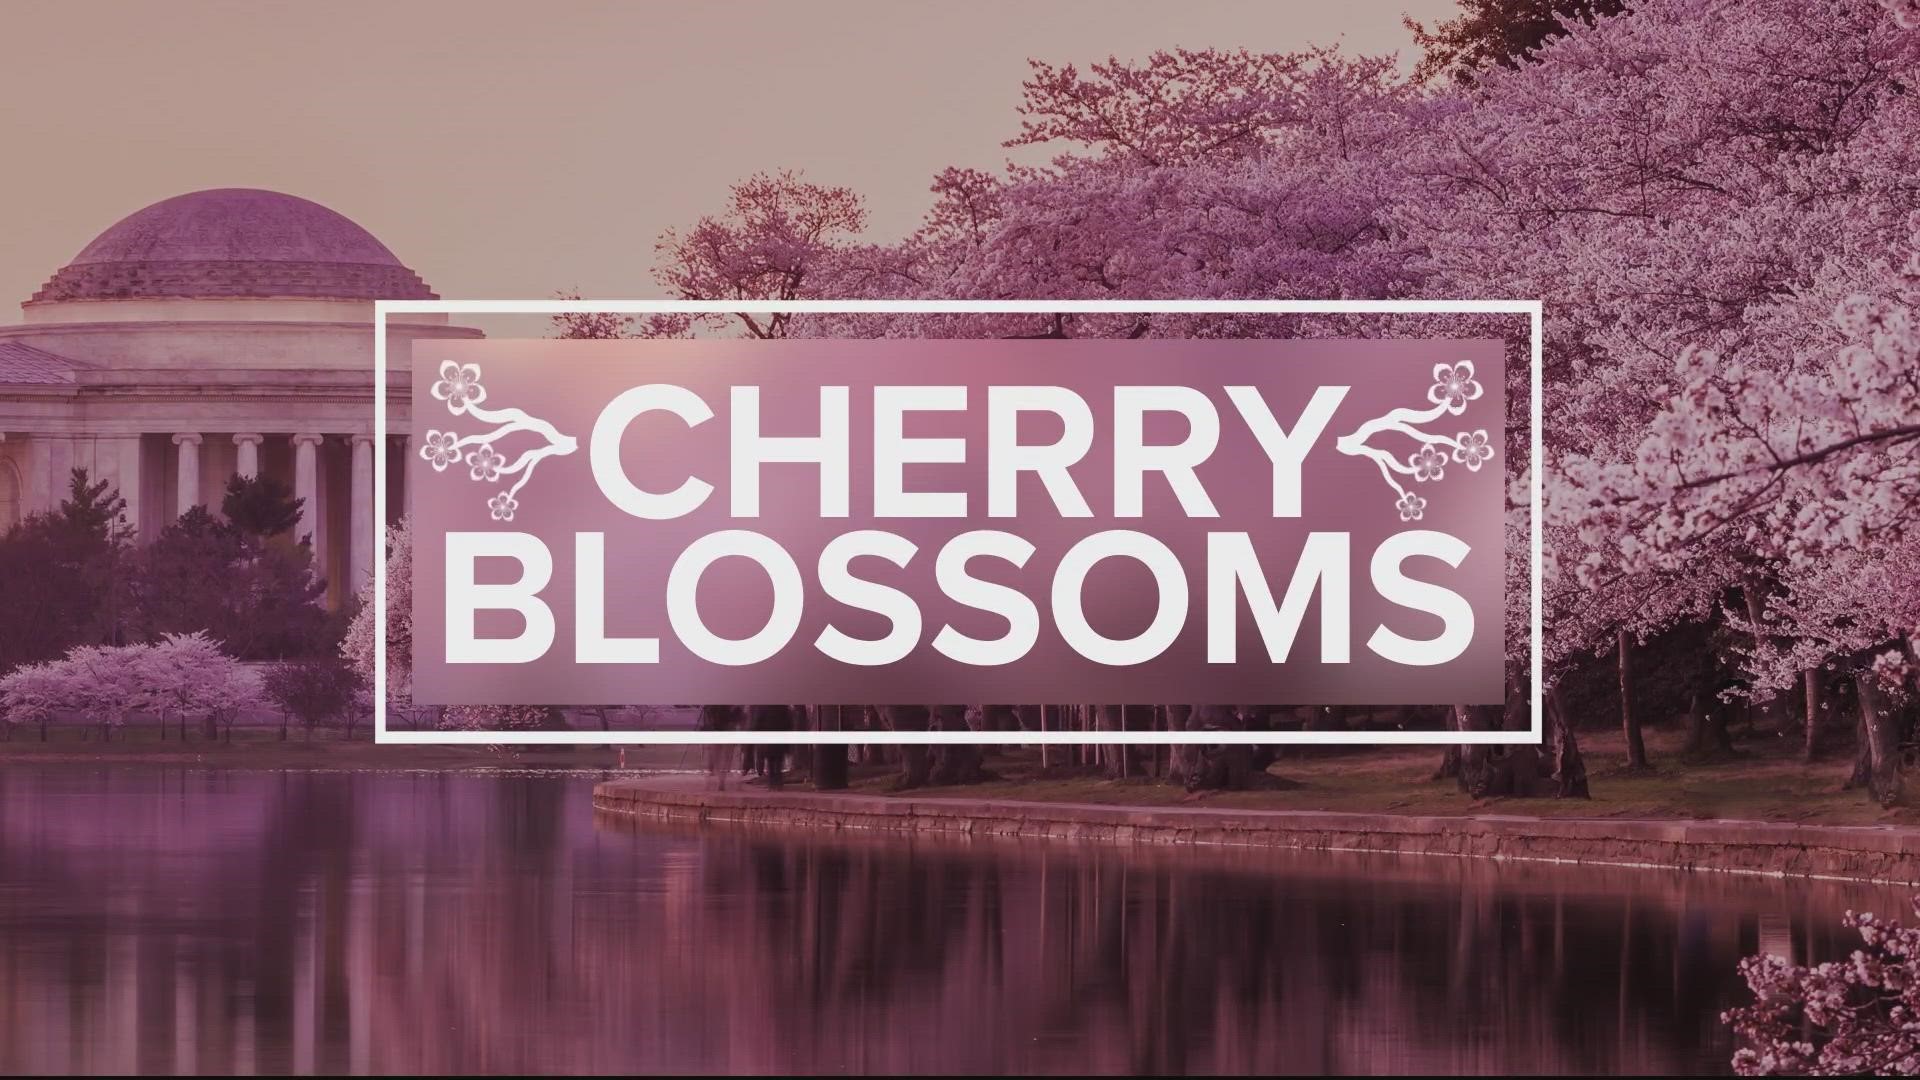 The moment many people across the DMV have been waiting for. The National Park Service has just issued its peak bloom prediction for our cherry blossoms.